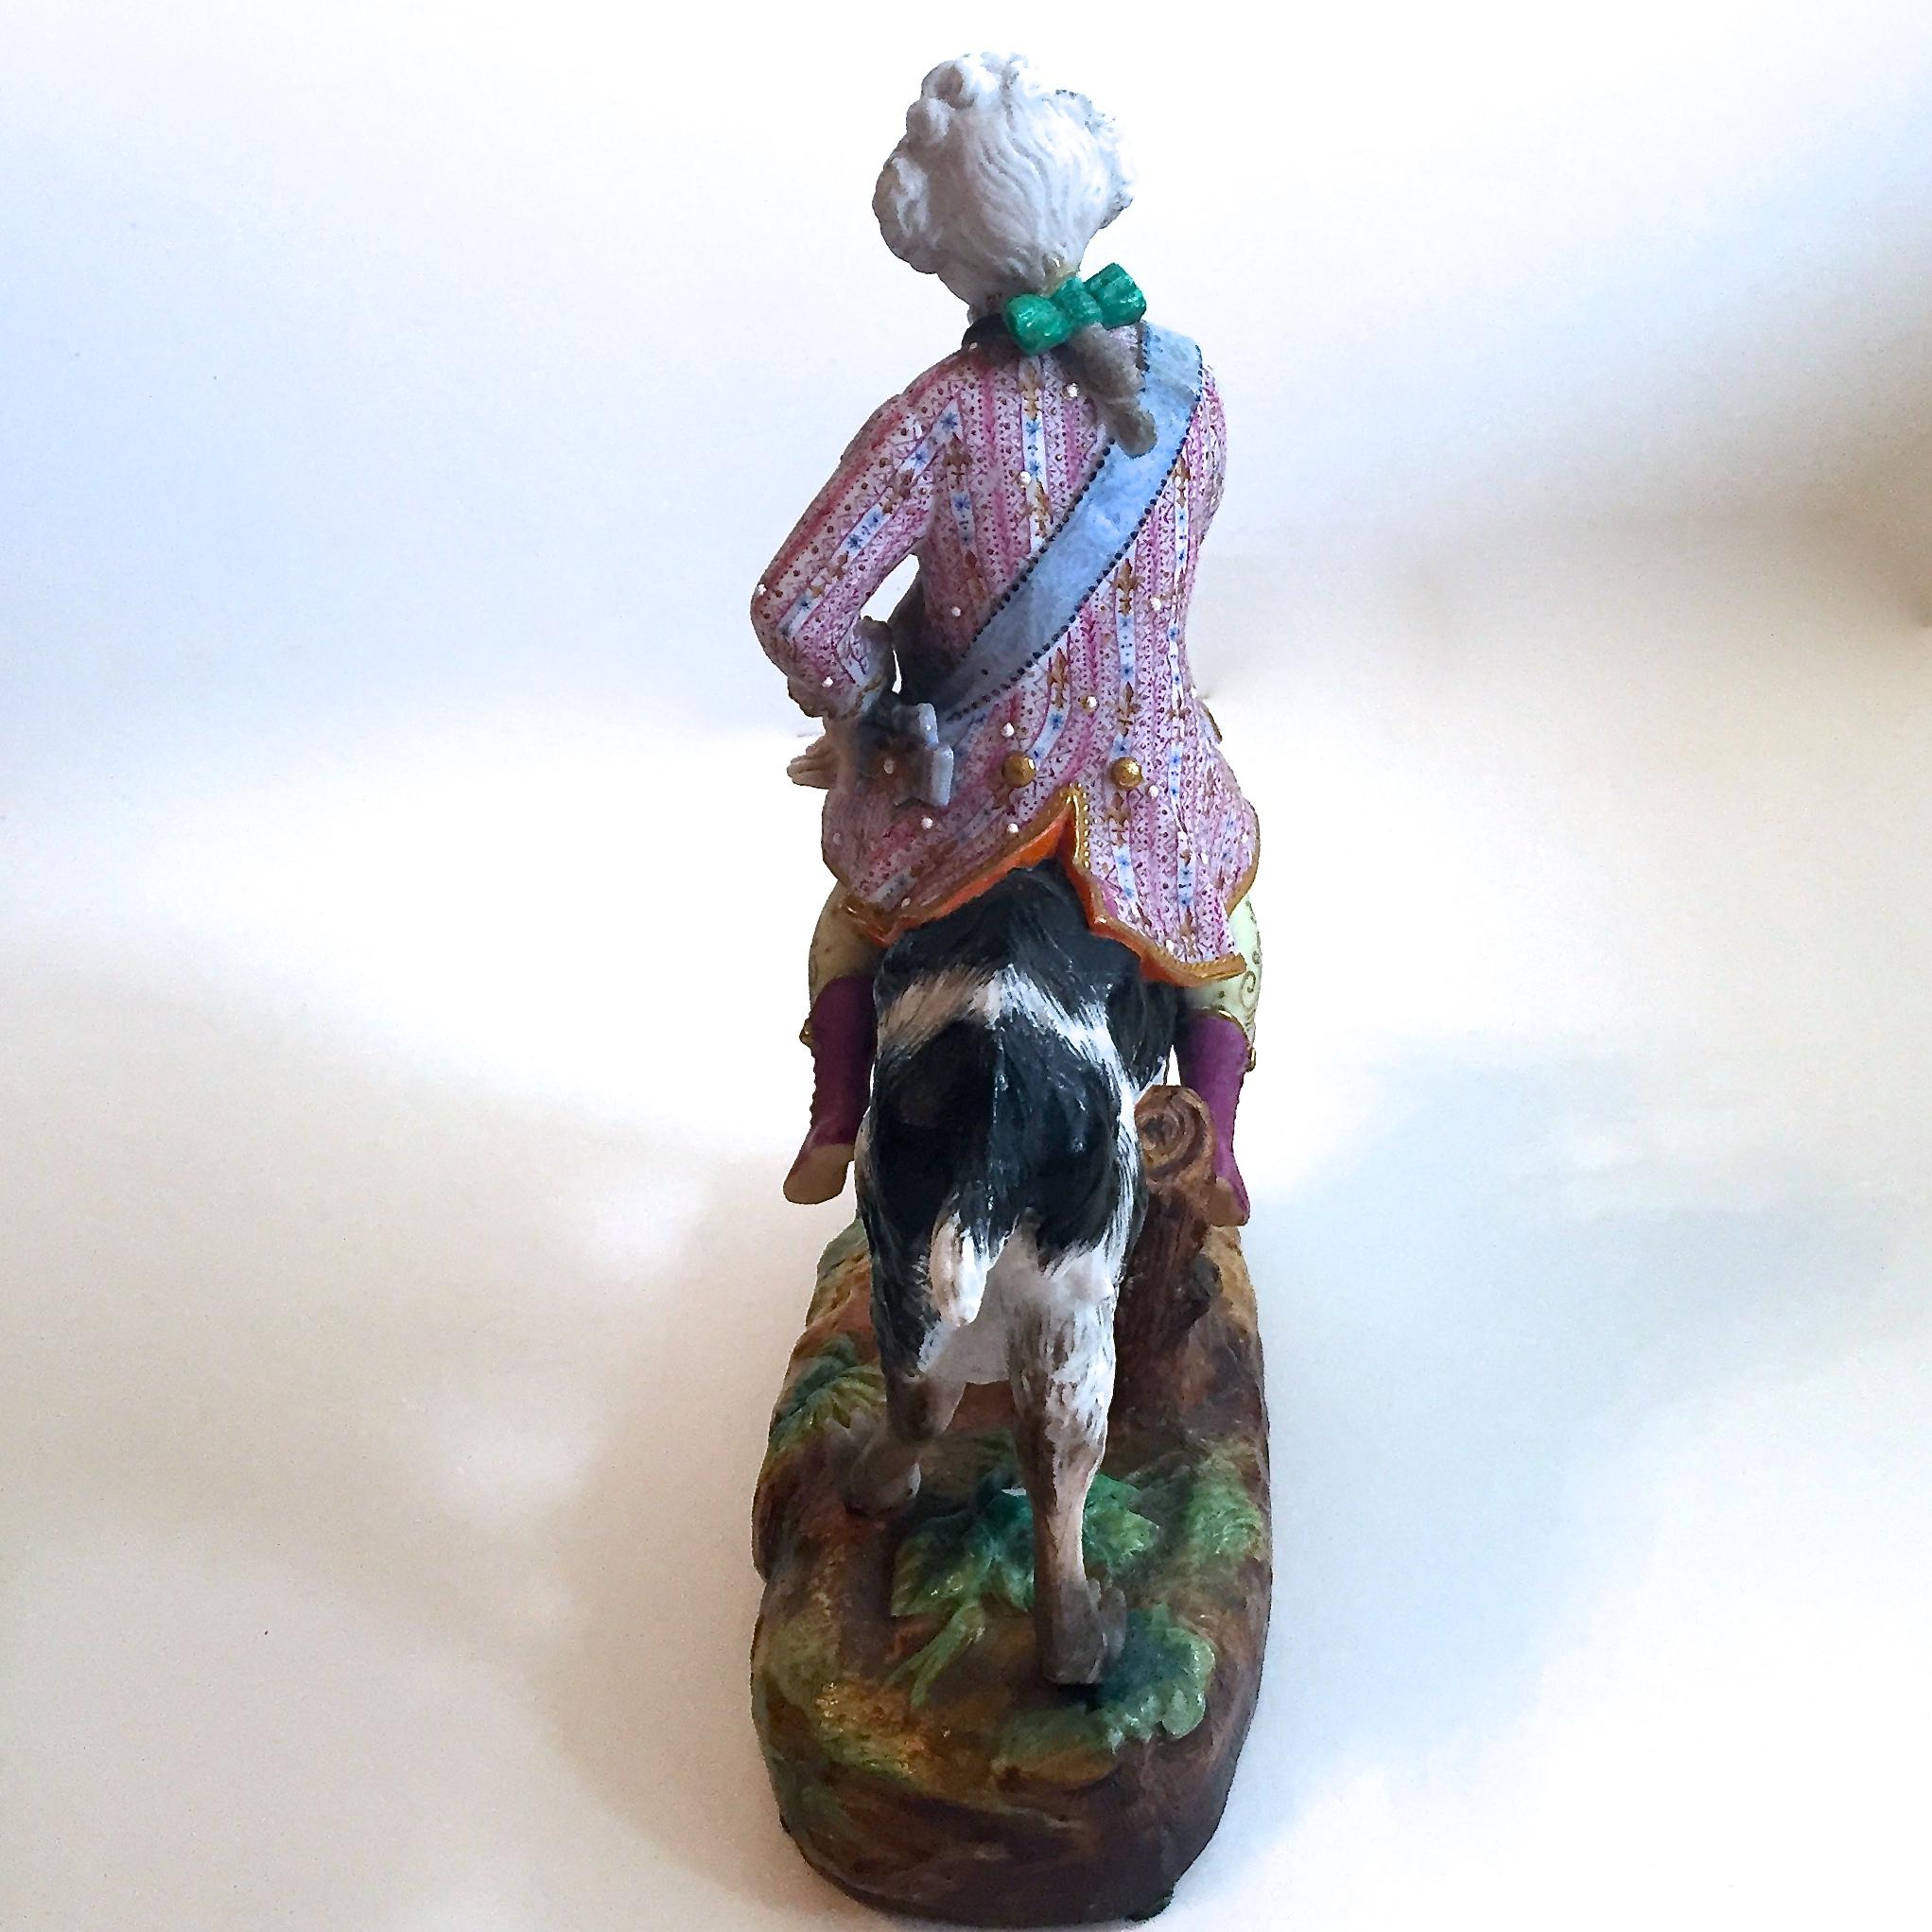 French Count Bruhl's Tailor, 19th C. Bisque Porcelain Goat And Rider By Vion Et Baury For Sale